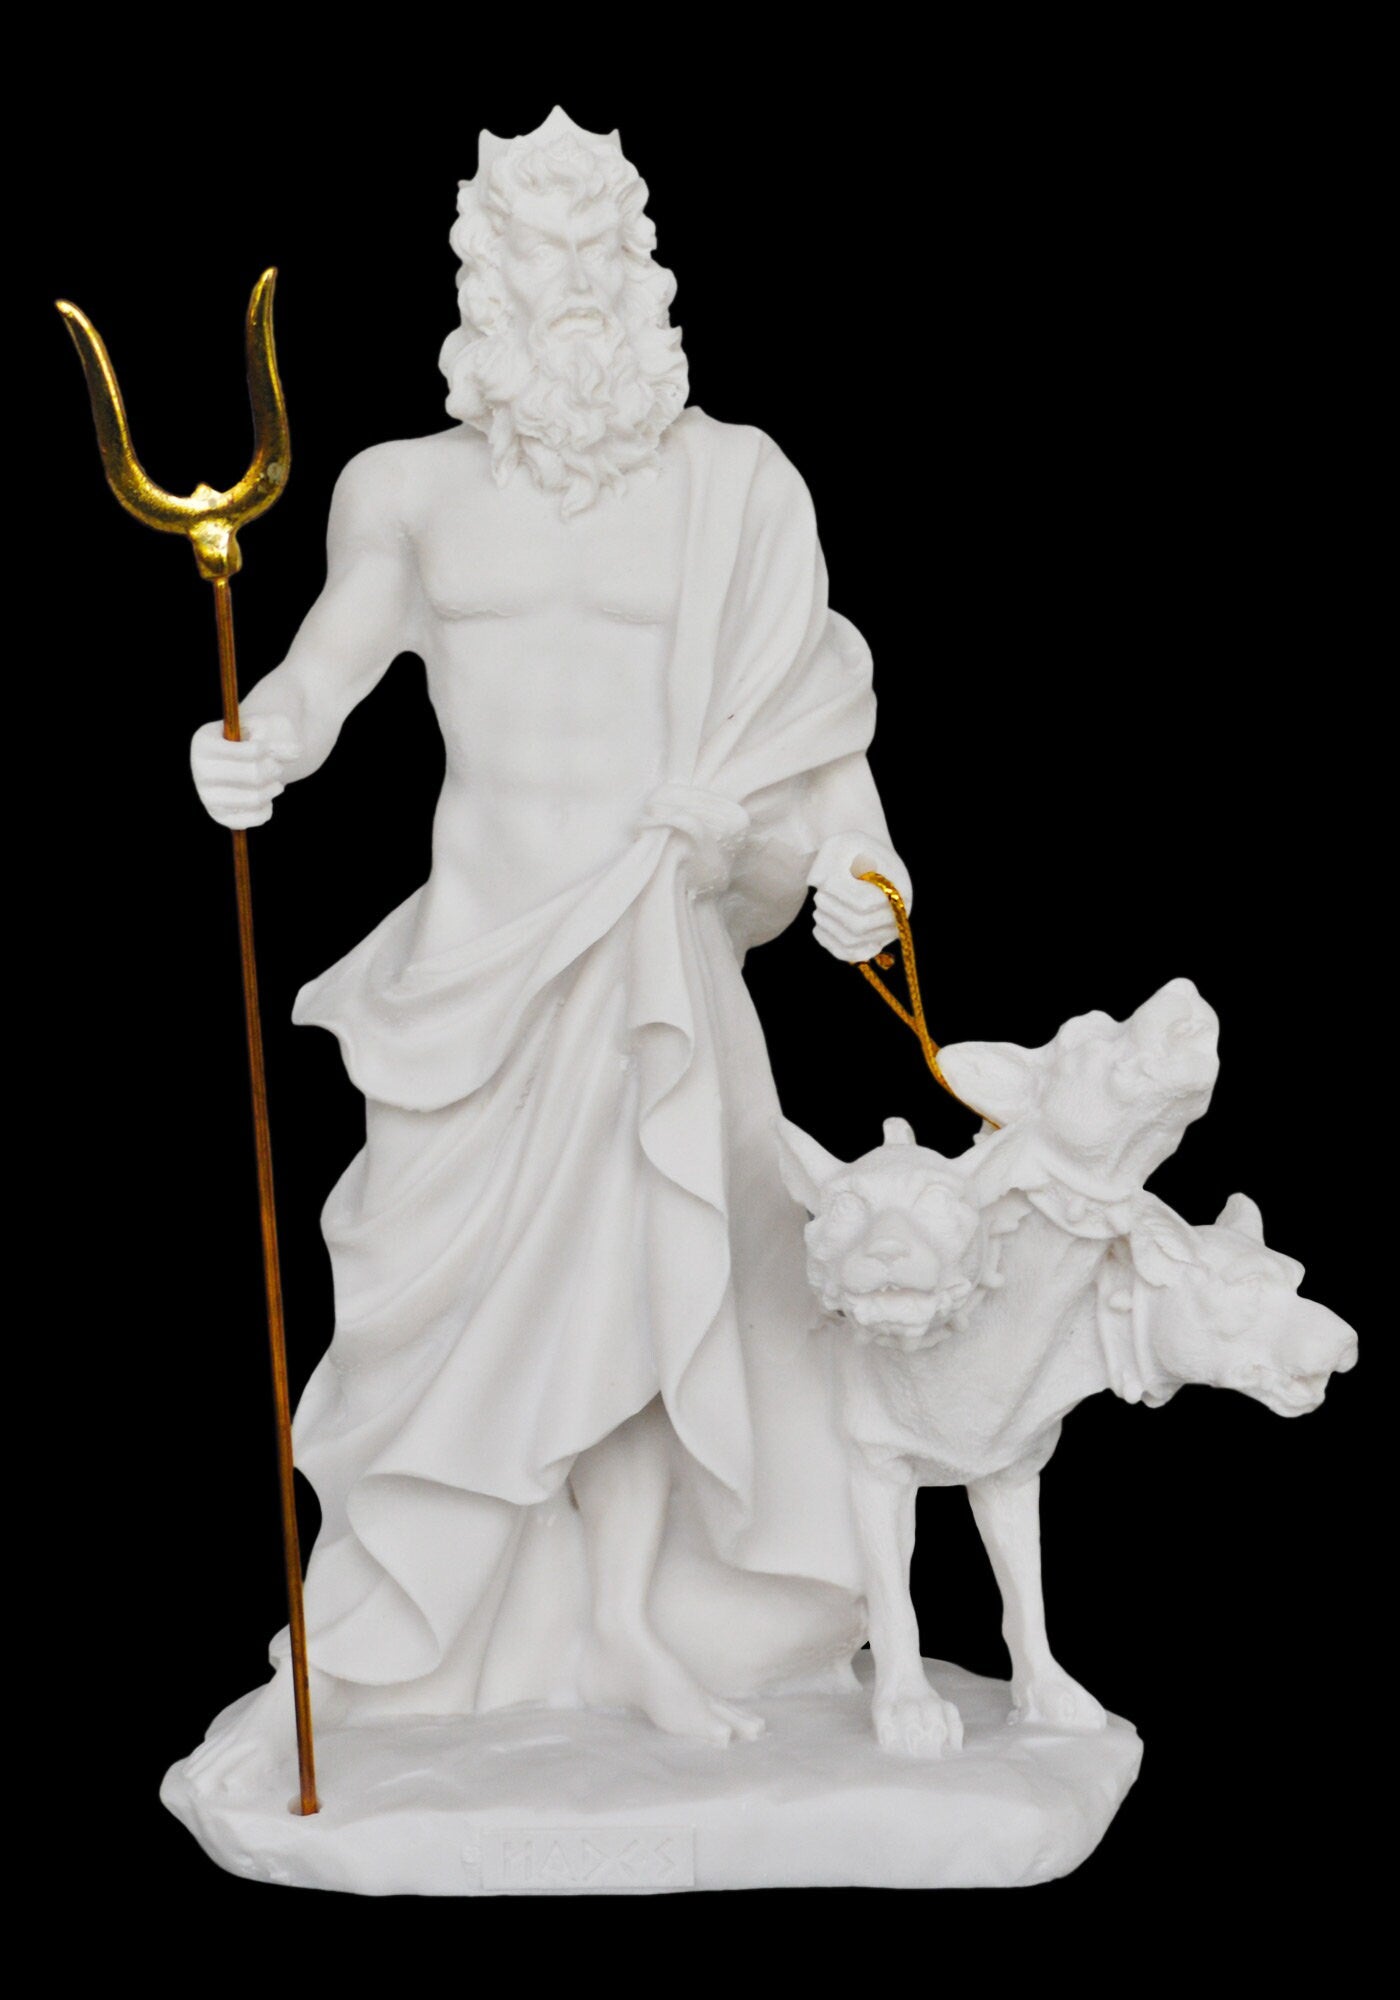 Hades and Cerberus - Greek Roman God of the Dead, King of the Underworld - Three-Headed Dog Guarding the Gates - Alabaster Statue